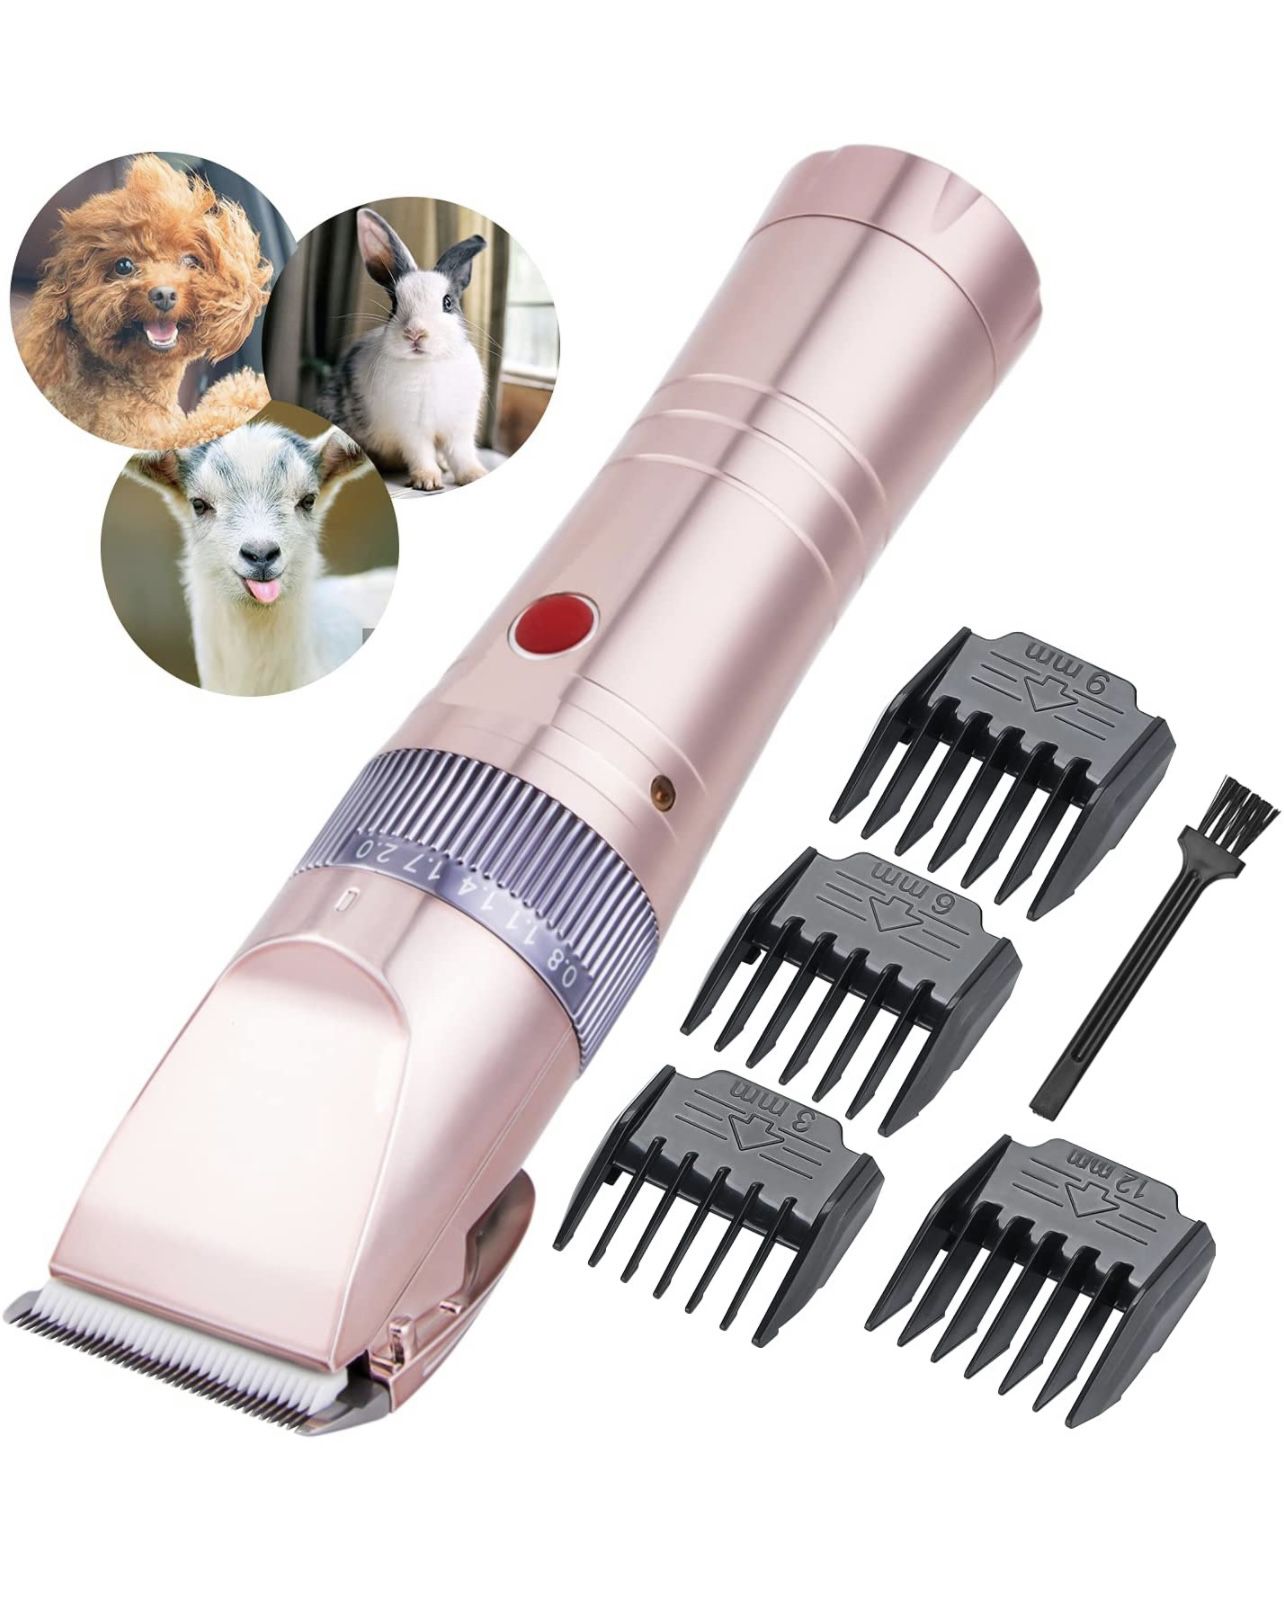 Professional Pet Grooming Clippers Kit Set 